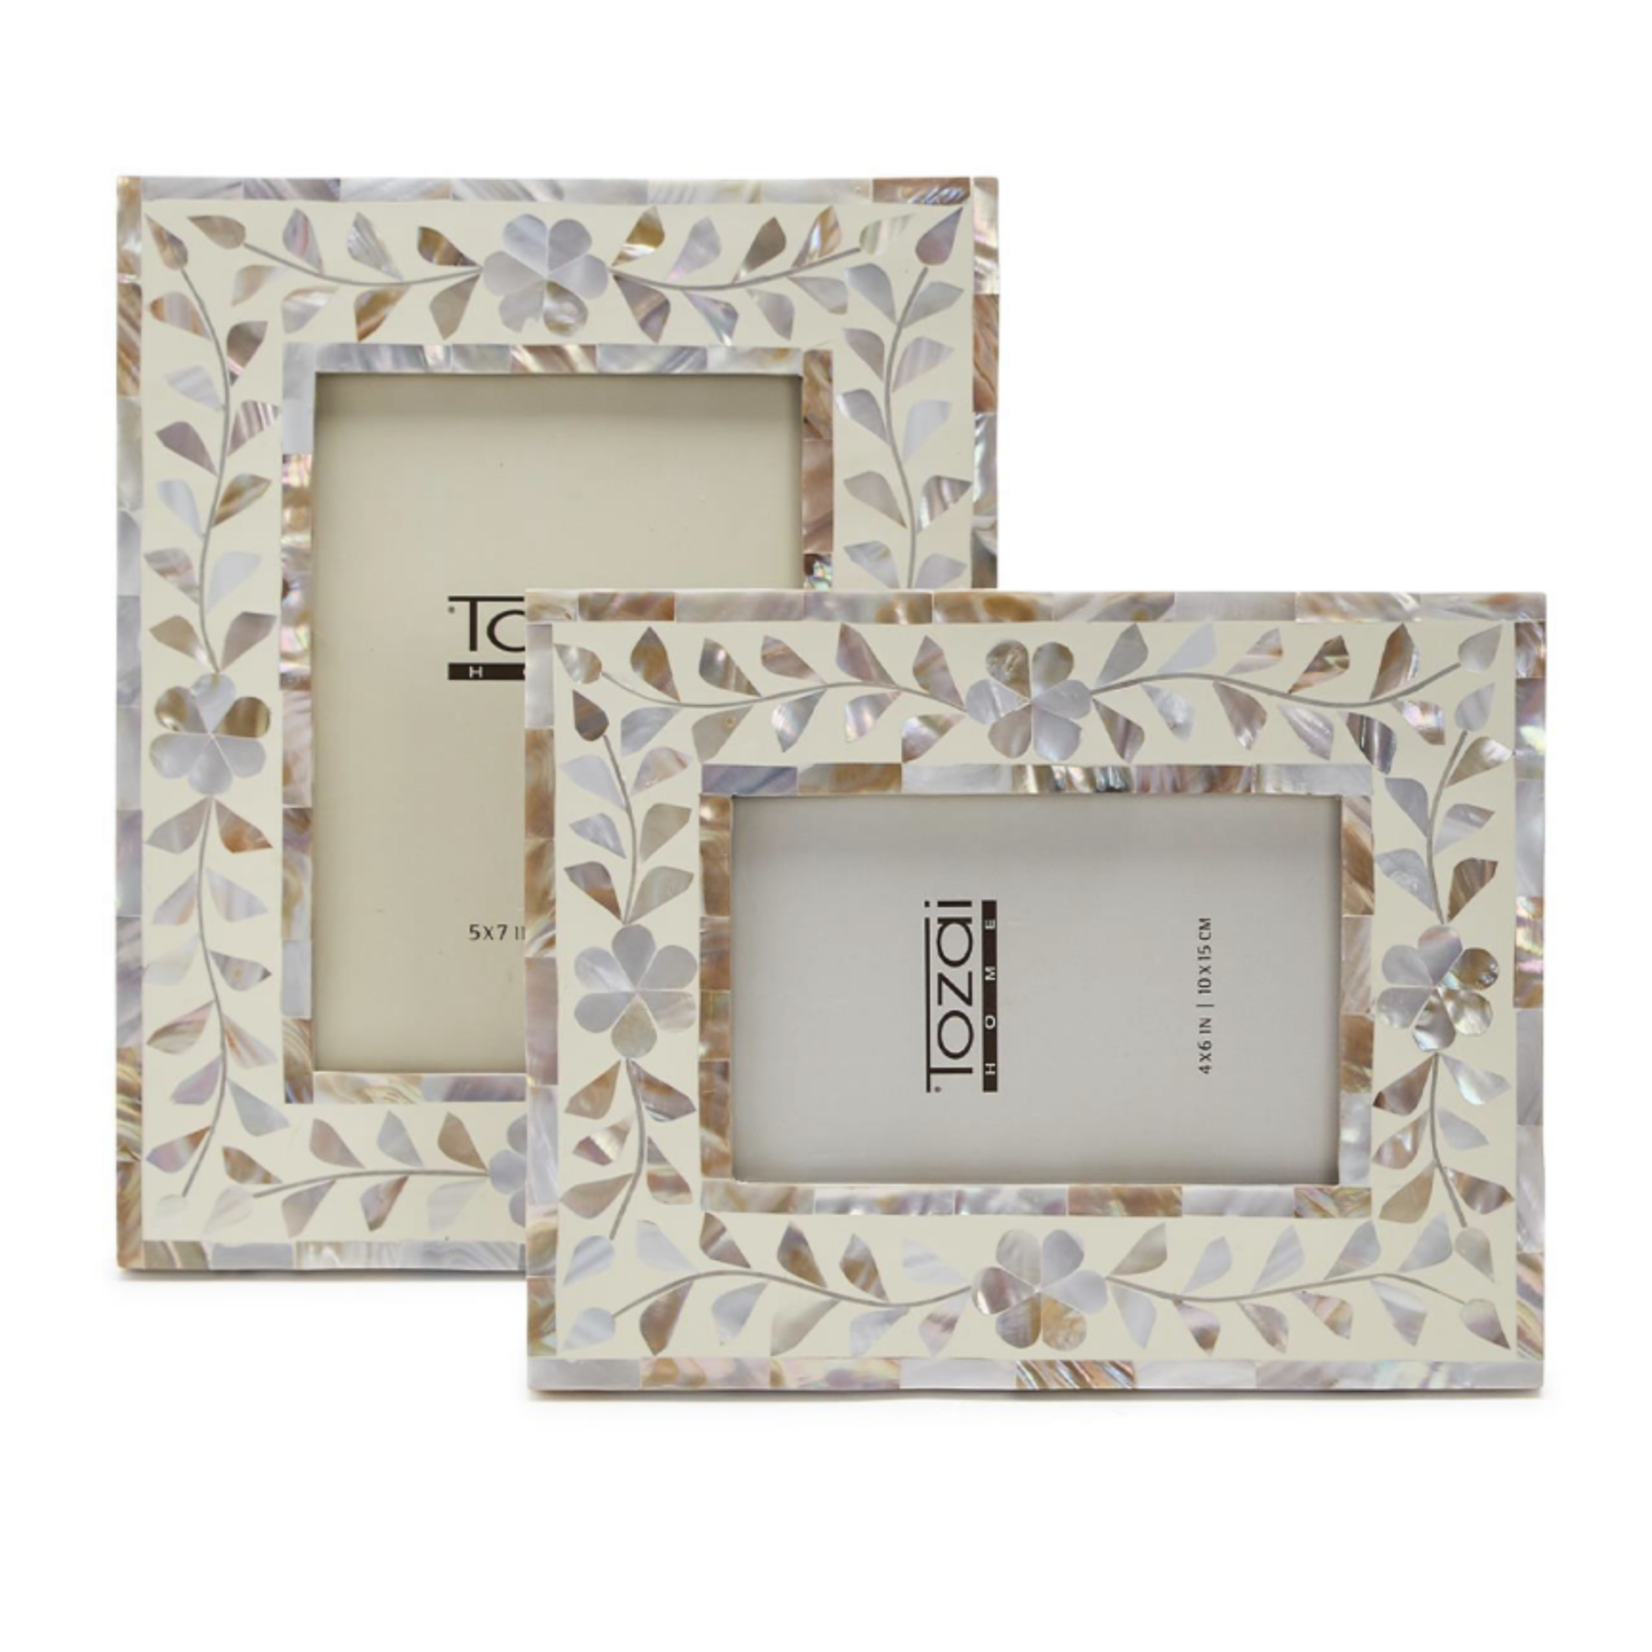 Outside The Box 5x7 Wisteria Tile Mother of Pearl &  Ivory Resin Photo Frame